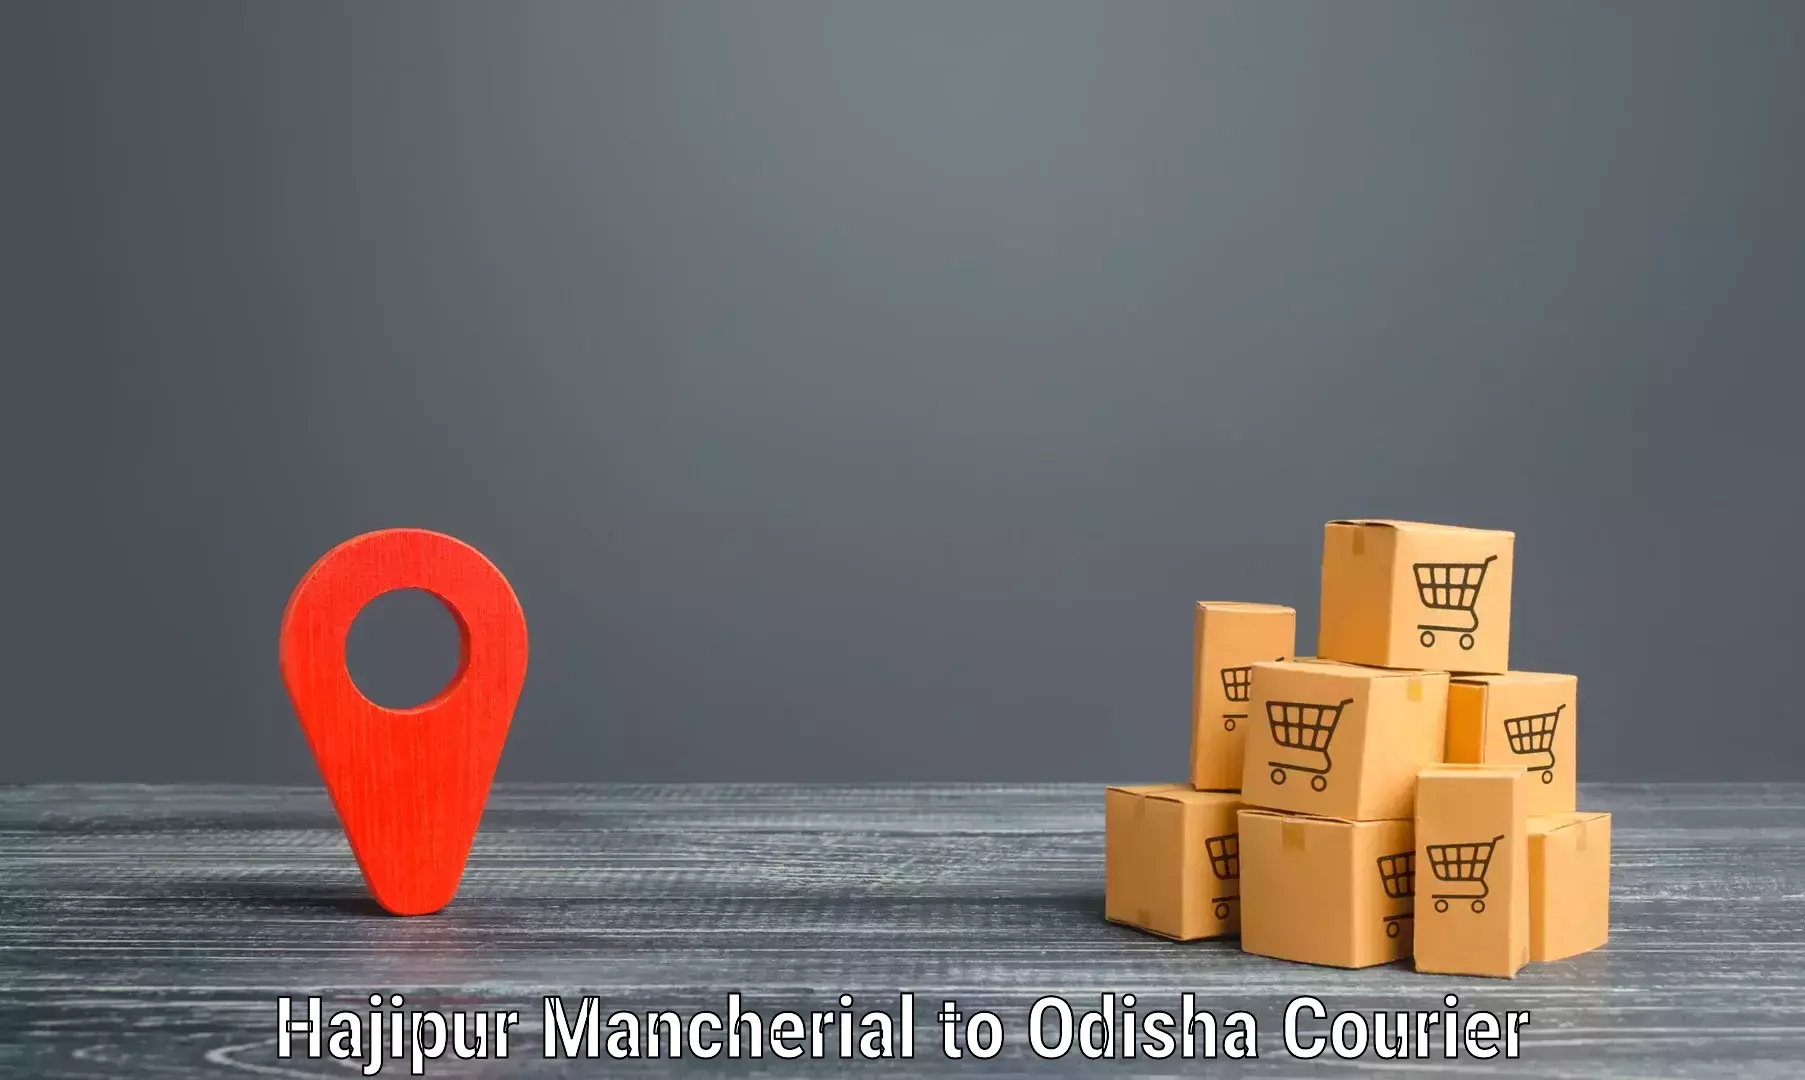 Custom courier packages in Hajipur Mancherial to Sohela